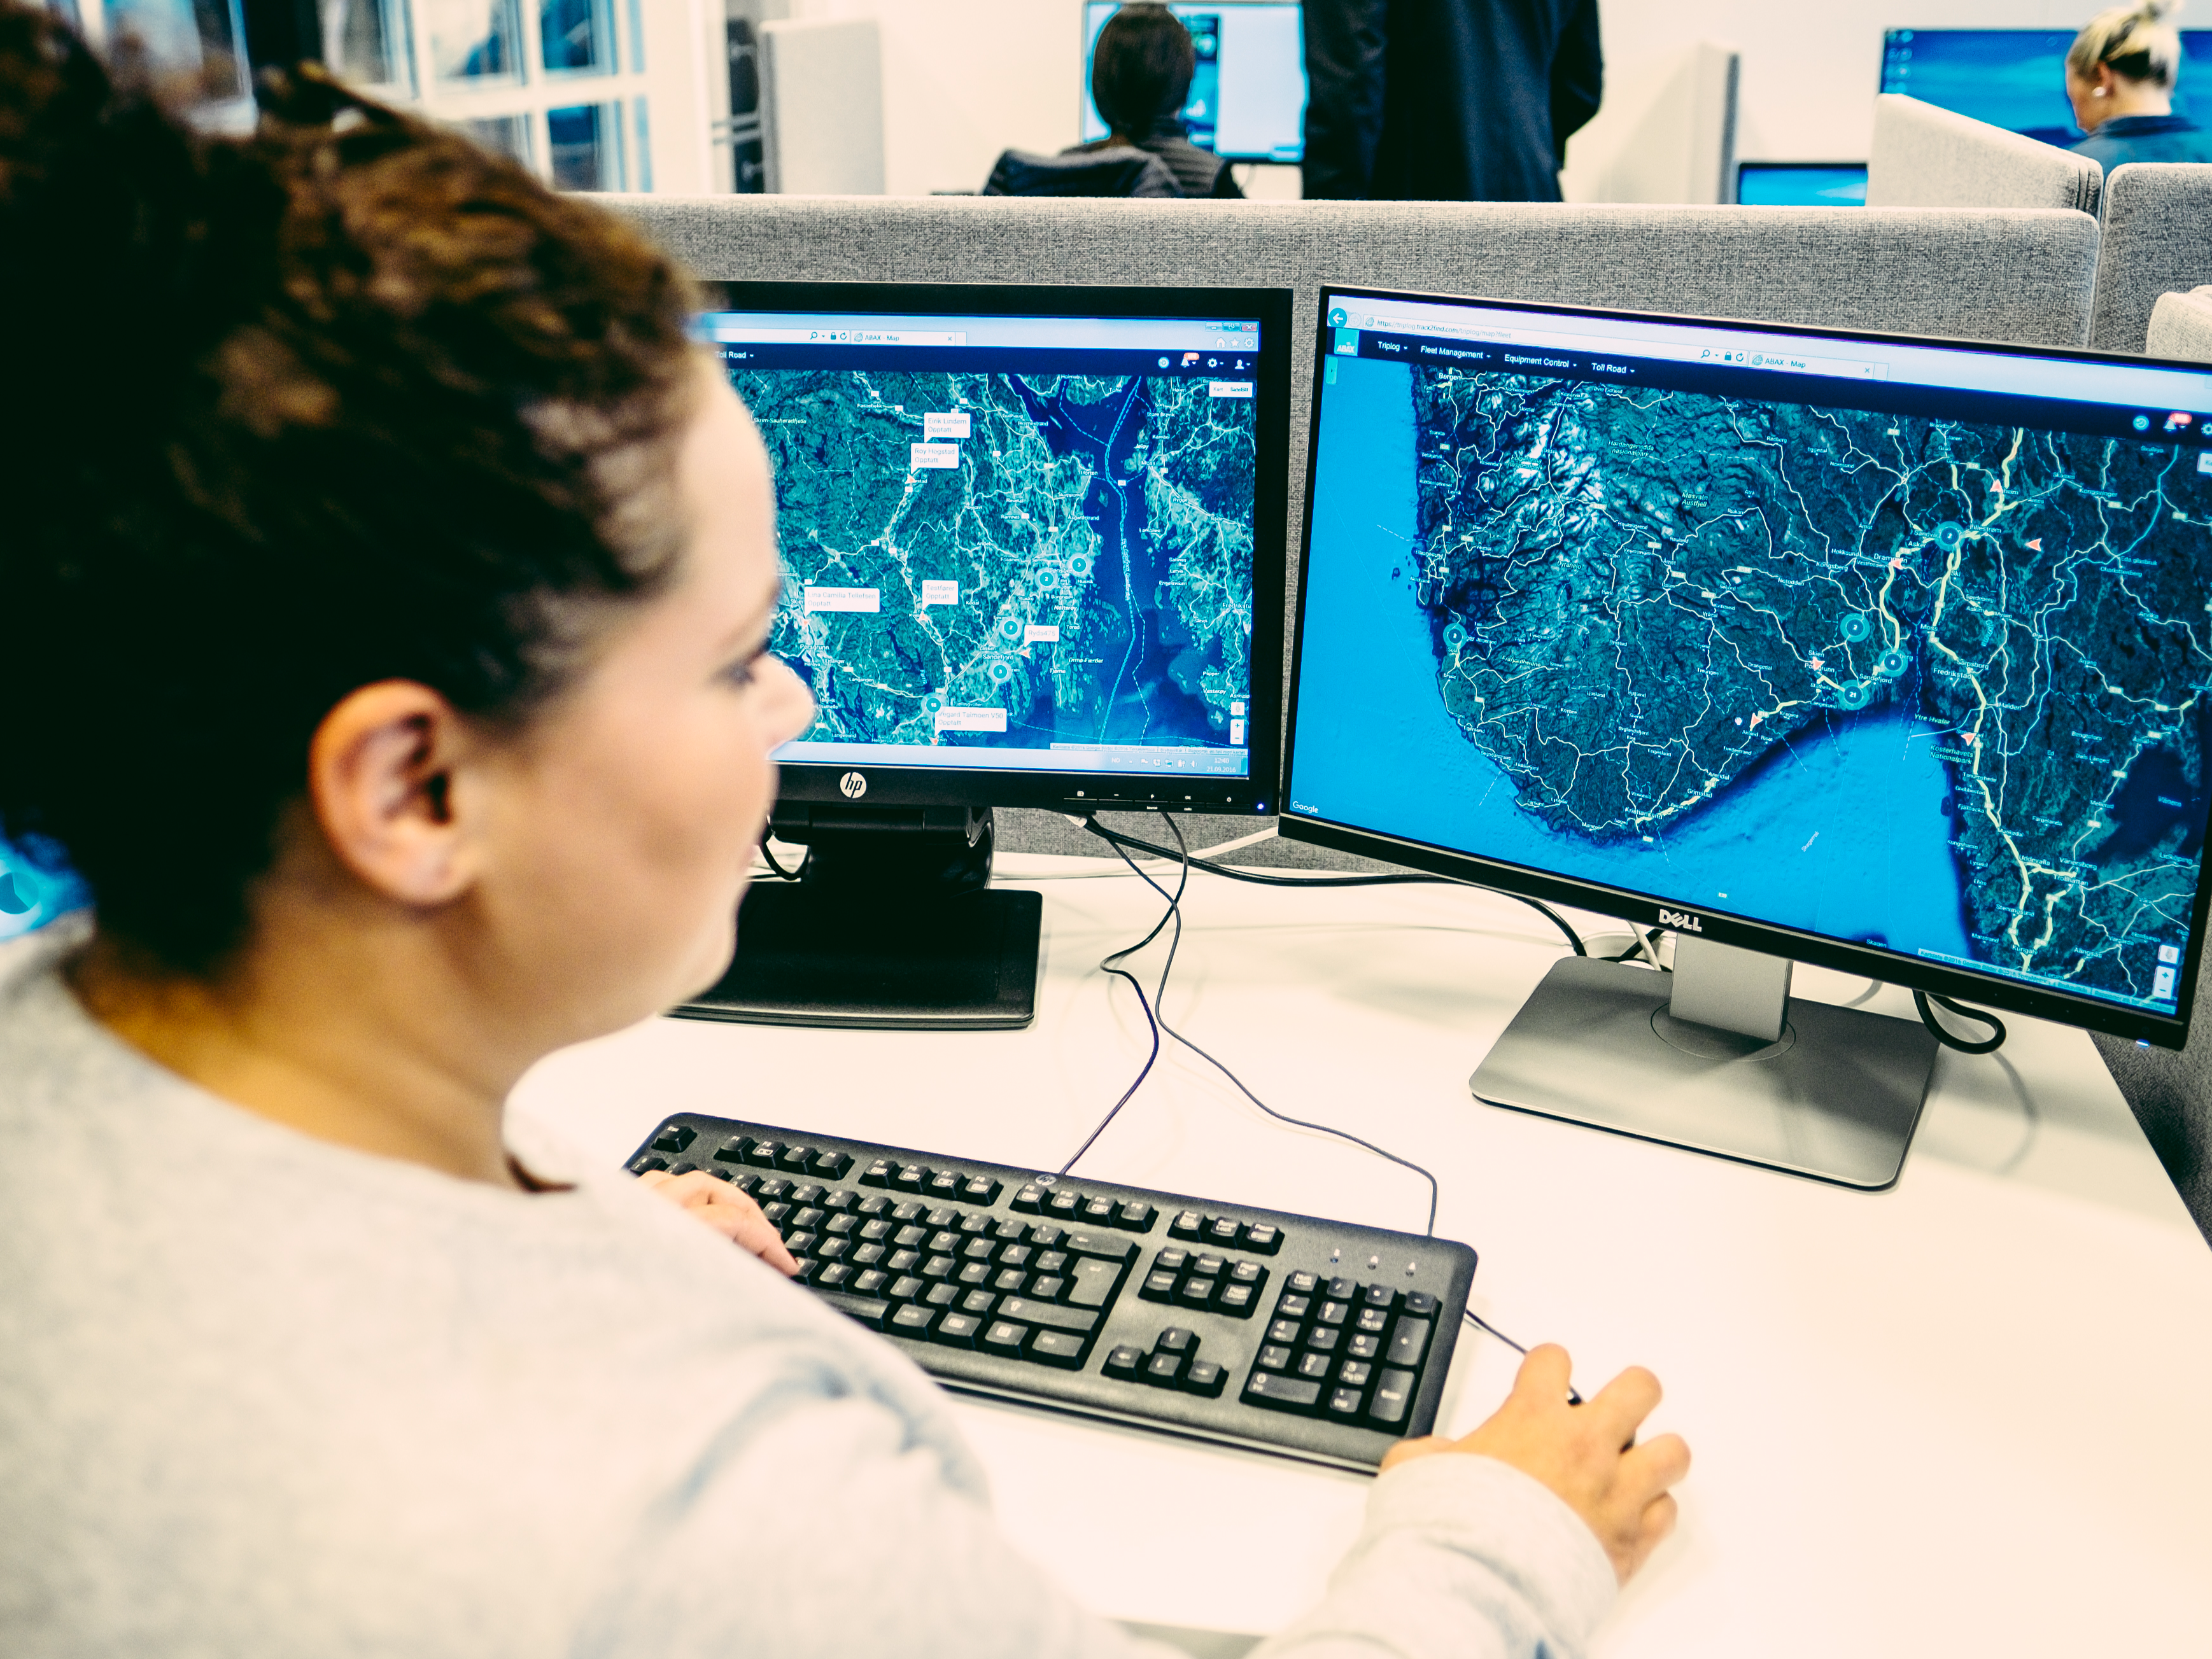 Woman managing fleet on computer screen which shows a map